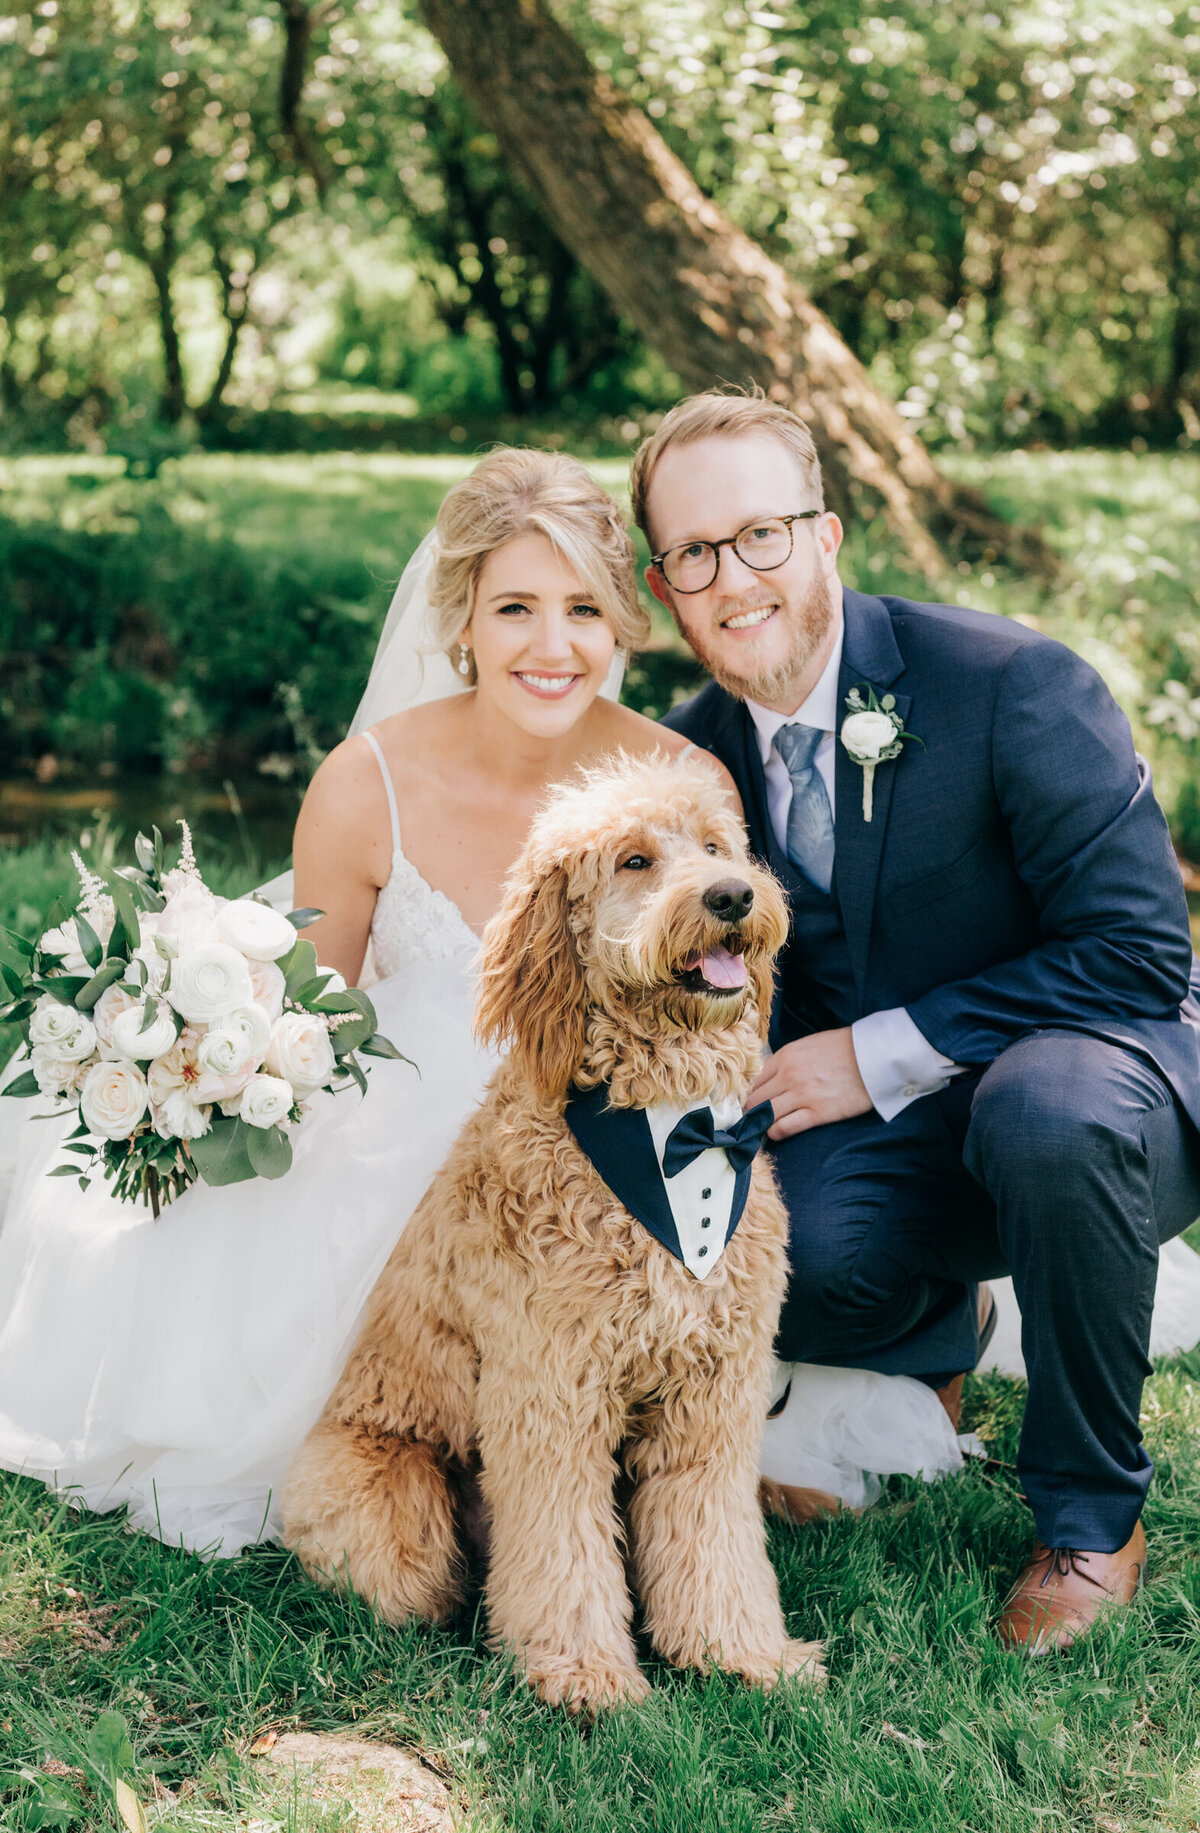 Dog dressed in tuxedo for bride and groom wedding portraits photographed by Nova Markina